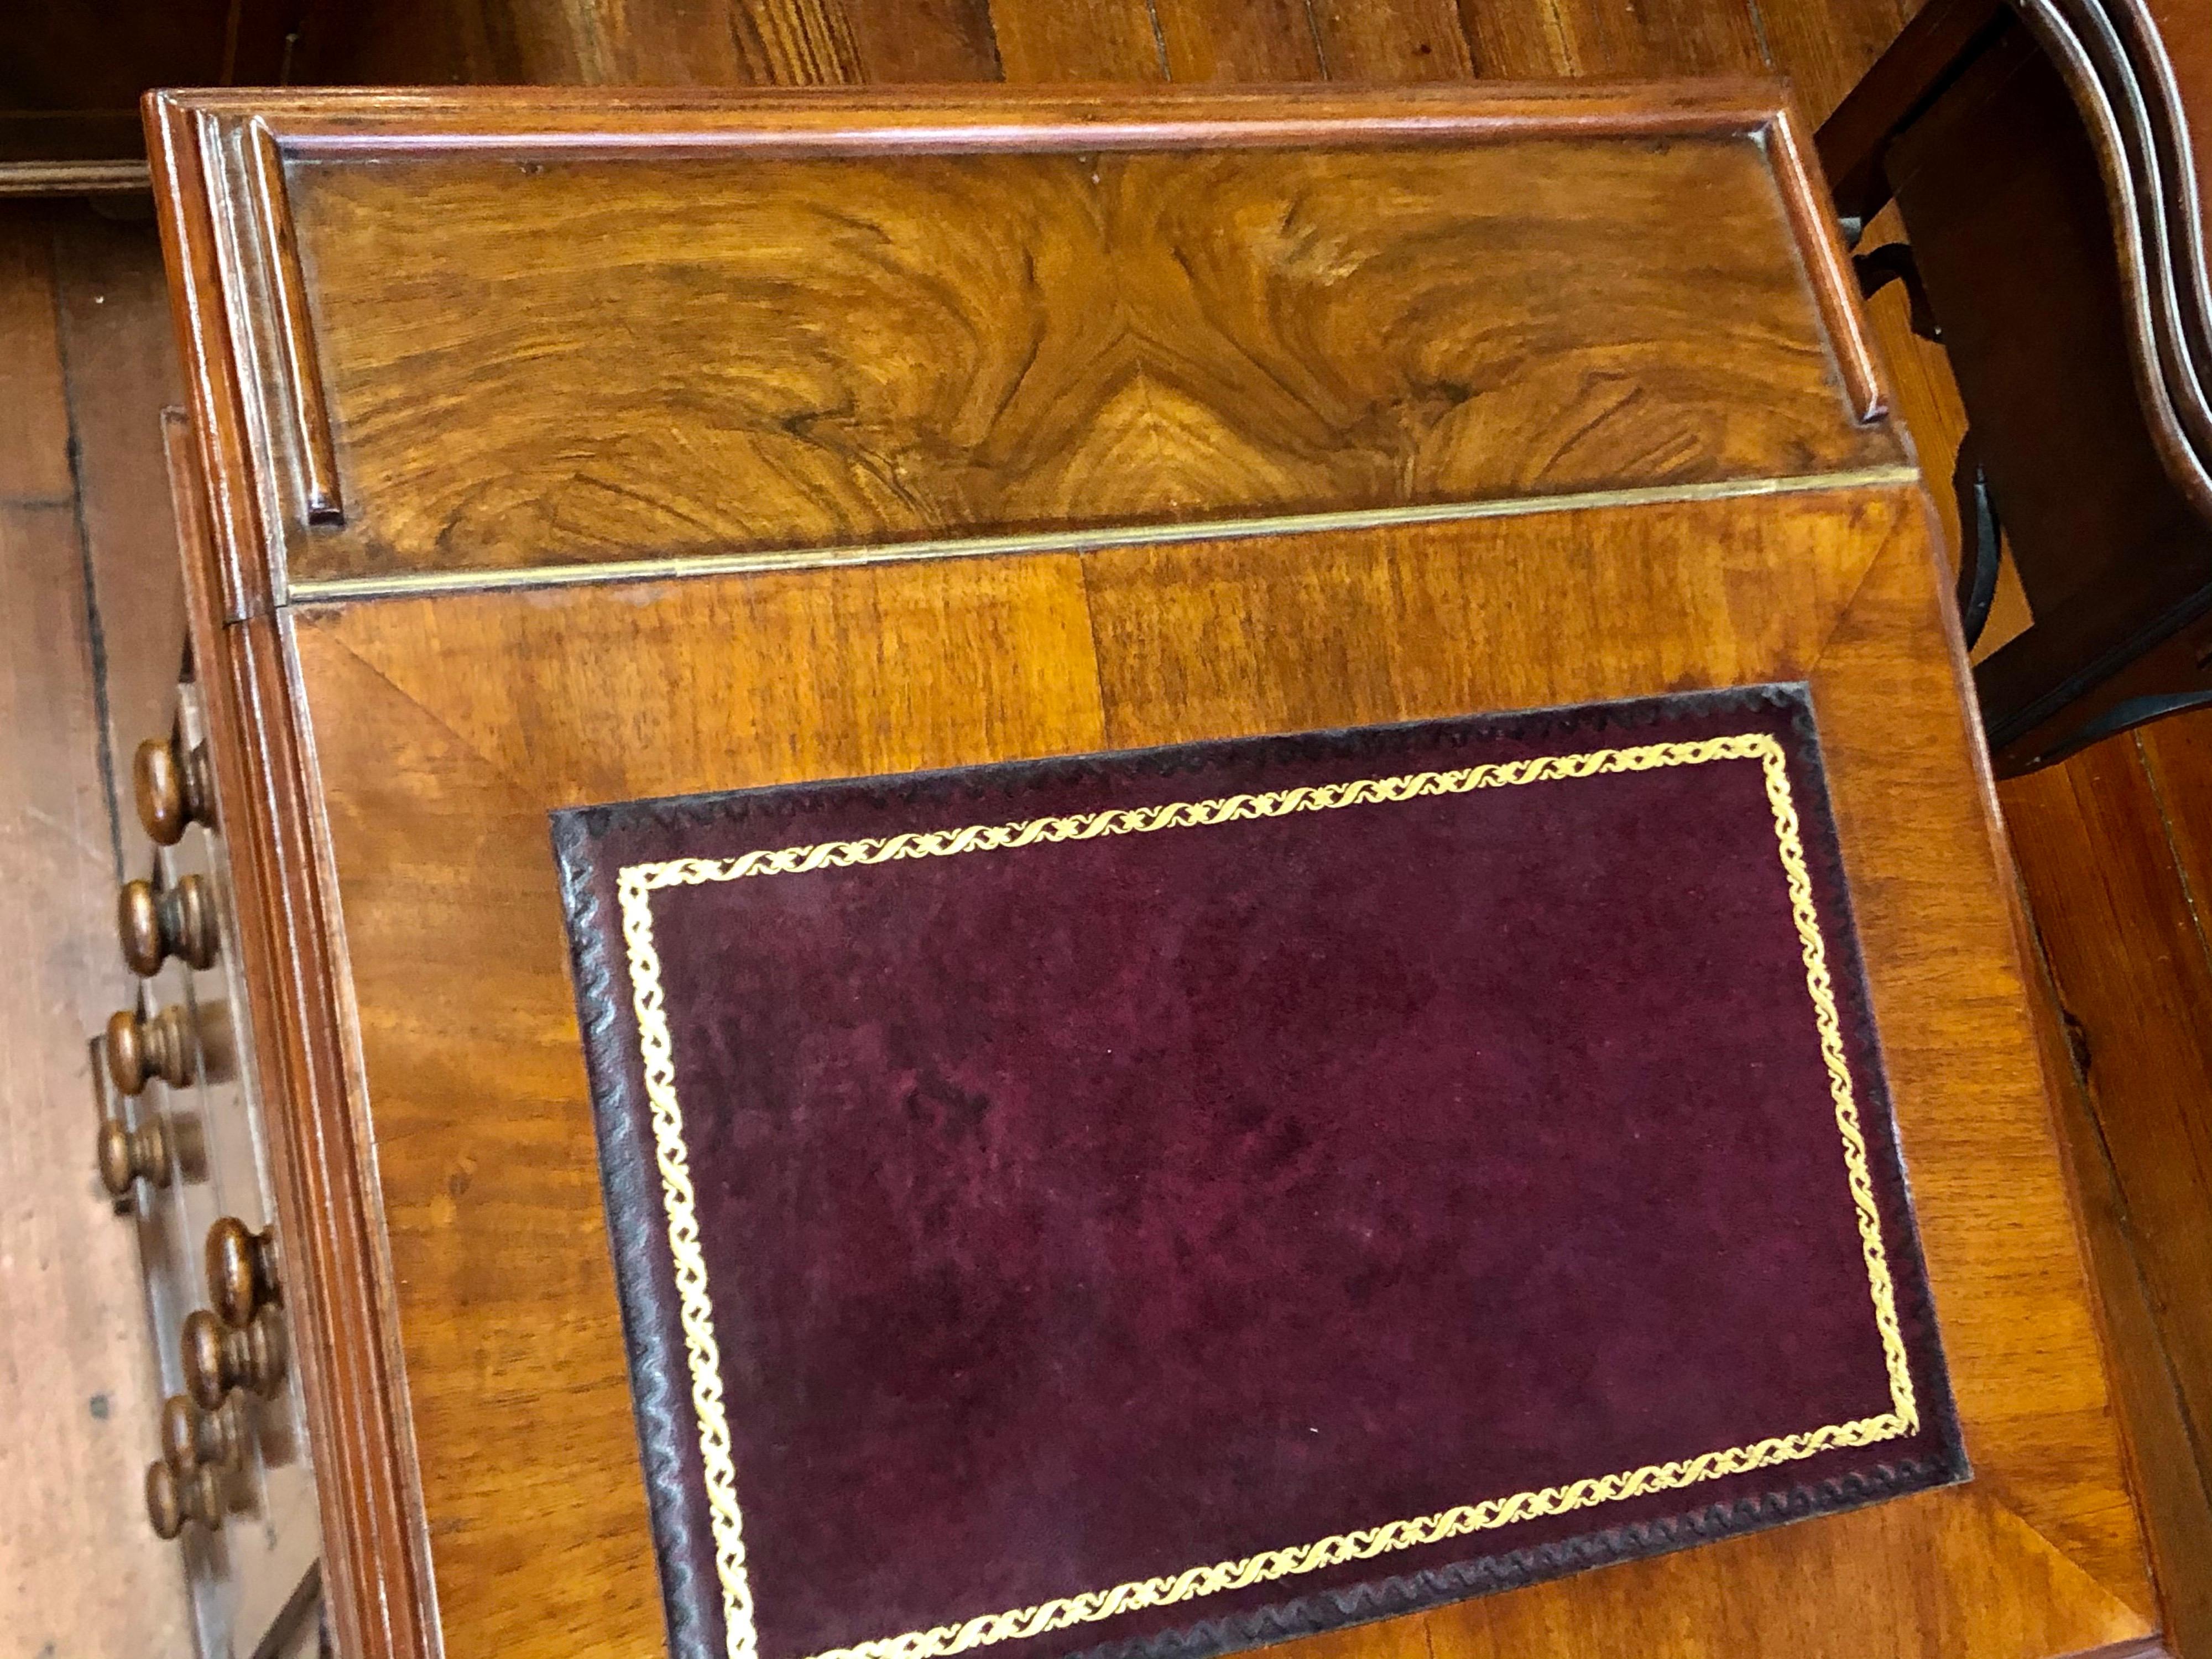 Antique English Inlaid Burr Walnut and Leather Davenport or Ship Captain’s Desk For Sale 5